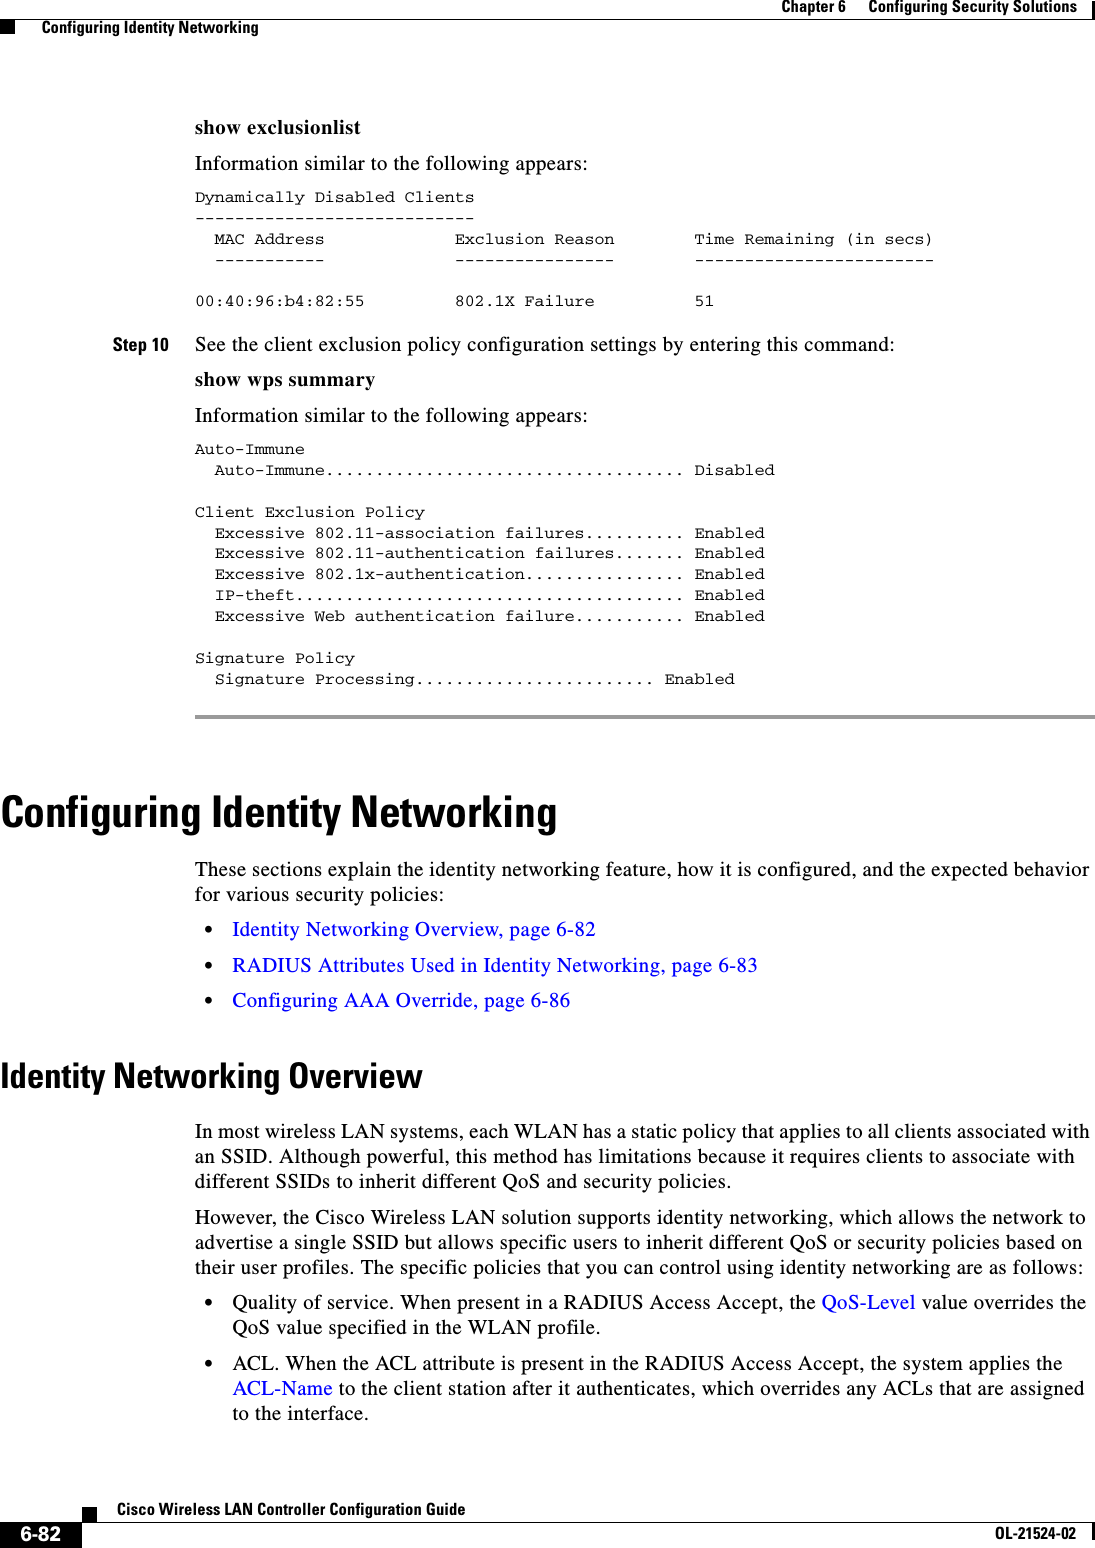  6-82Cisco Wireless LAN Controller Configuration GuideOL-21524-02Chapter 6      Configuring Security Solutions  Configuring Identity Networkingshow exclusionlistInformation similar to the following appears:Dynamically Disabled Clients----------------------------  MAC Address             Exclusion Reason        Time Remaining (in secs)  -----------             ----------------        ------------------------00:40:96:b4:82:55         802.1X Failure          51Step 10 See the client exclusion policy configuration settings by entering this command:show wps summaryInformation similar to the following appears:Auto-Immune  Auto-Immune.................................... DisabledClient Exclusion Policy  Excessive 802.11-association failures.......... Enabled  Excessive 802.11-authentication failures....... Enabled  Excessive 802.1x-authentication................ Enabled  IP-theft....................................... Enabled  Excessive Web authentication failure........... EnabledSignature Policy  Signature Processing........................ Enabled Configuring Identity NetworkingThese sections explain the identity networking feature, how it is configured, and the expected behavior for various security policies:  • Identity Networking Overview, page 6-82  • RADIUS Attributes Used in Identity Networking, page 6-83  • Configuring AAA Override, page 6-86Identity Networking OverviewIn most wireless LAN systems, each WLAN has a static policy that applies to all clients associated with an SSID. Although powerful, this method has limitations because it requires clients to associate with different SSIDs to inherit different QoS and security policies.However, the Cisco Wireless LAN solution supports identity networking, which allows the network to advertise a single SSID but allows specific users to inherit different QoS or security policies based on their user profiles. The specific policies that you can control using identity networking are as follows:  • Quality of service. When present in a RADIUS Access Accept, the QoS-Level value overrides the QoS value specified in the WLAN profile.  • ACL. When the ACL attribute is present in the RADIUS Access Accept, the system applies the ACL-Name to the client station after it authenticates, which overrides any ACLs that are assigned to the interface.